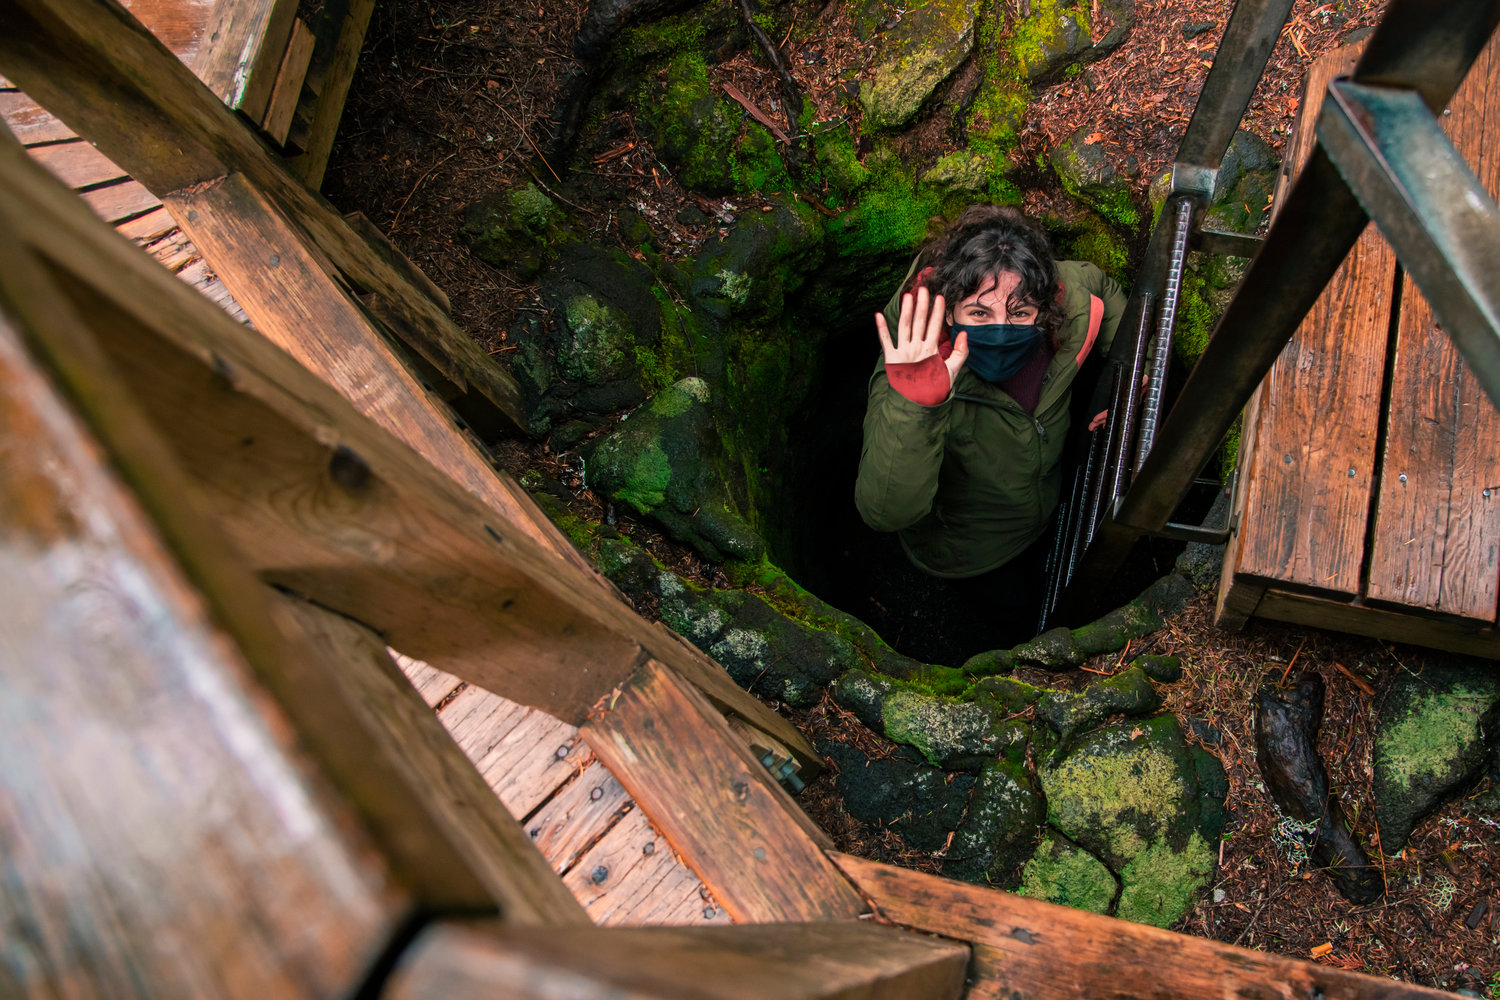 One tunnel, formed by fallen trees encompassed by lava at the Trail of Two Forests, created a claustrophobic crawl space visitors can now move through on their hands and knees. In this photo, Chronicle reporter Claudia Yaw waves while descending into the tunnel last week.